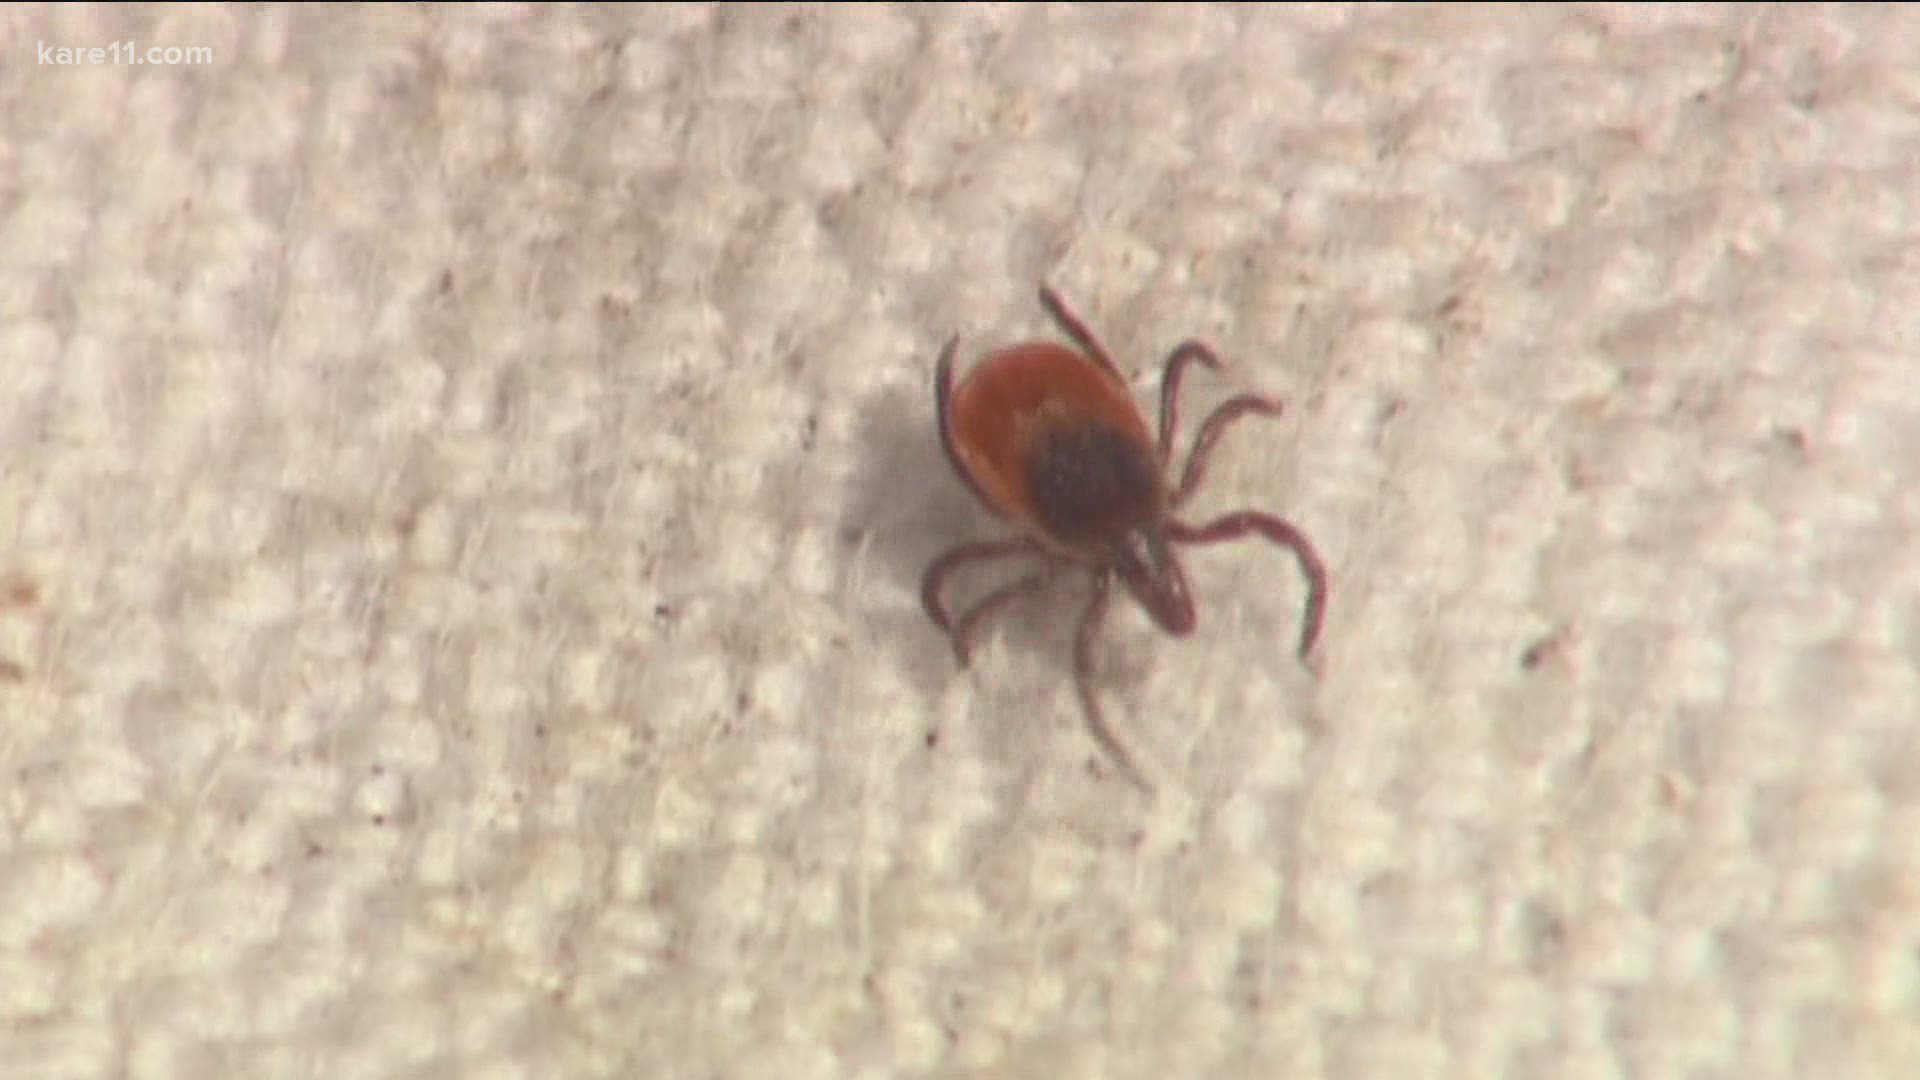 Weather, acorn crop, number of rodents all play a role in amount of ticks, according to the U of M School of Public Health.